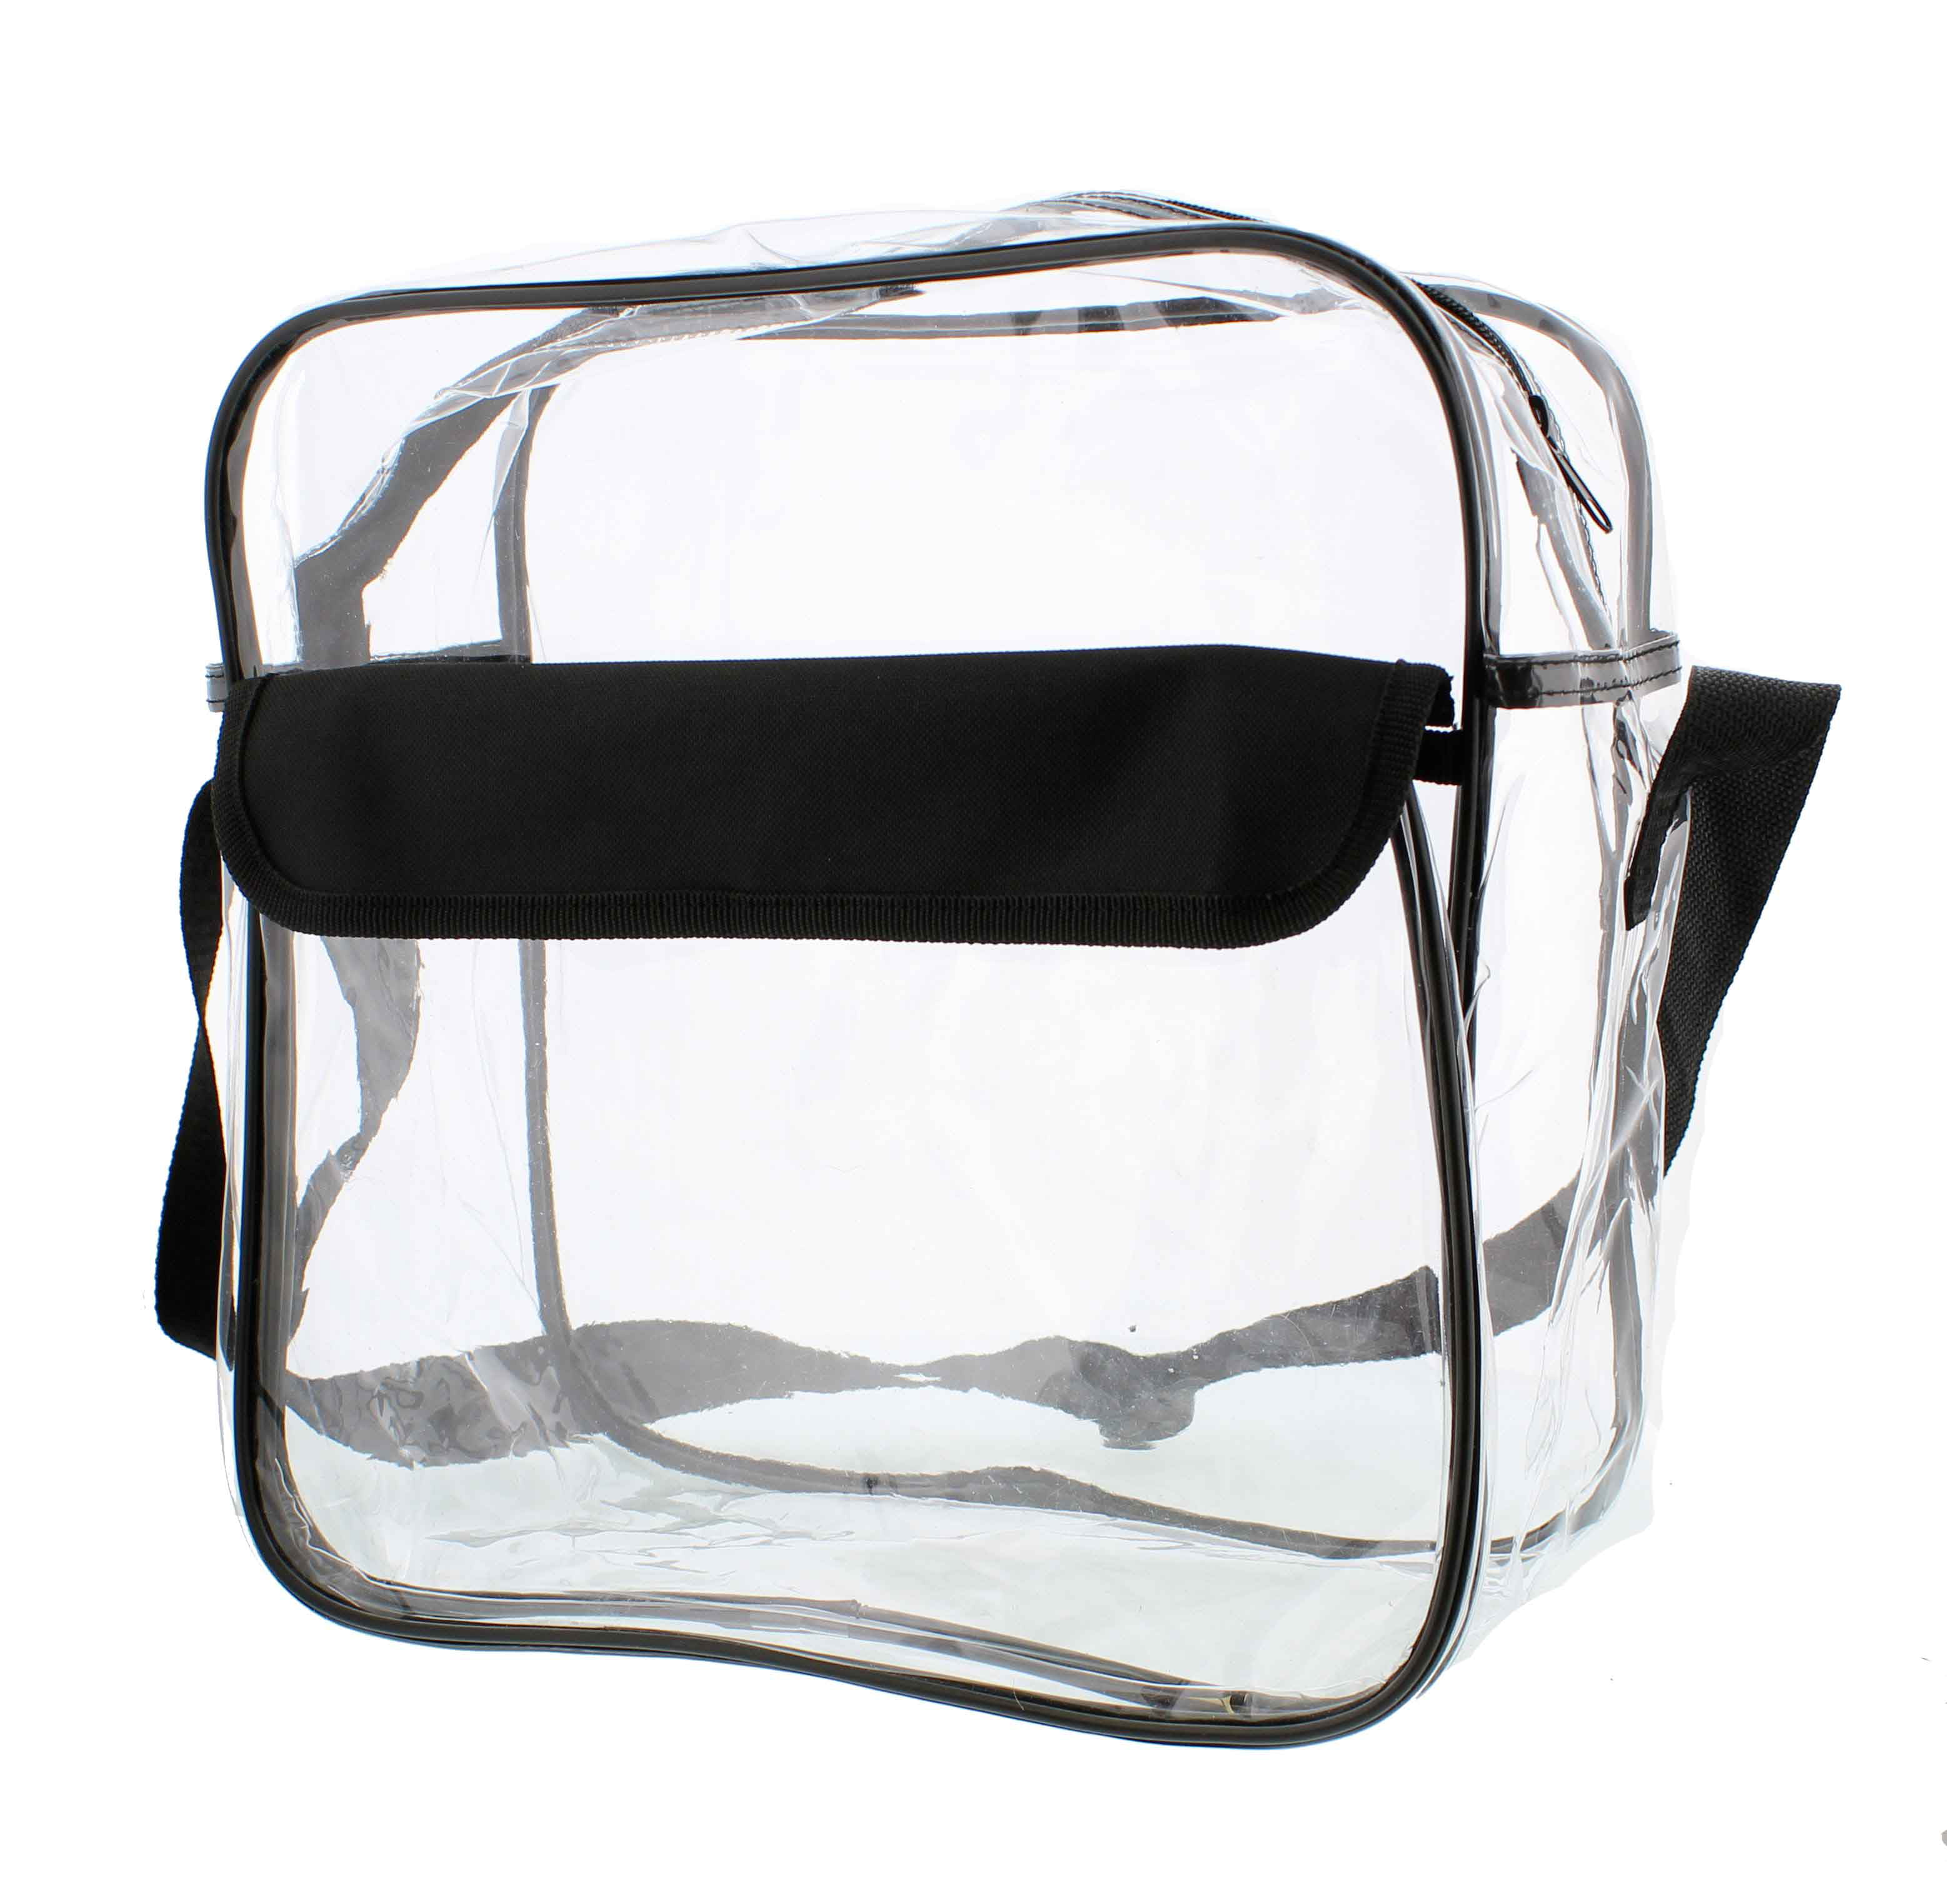 RC Clear Purse 12? x 12? x 6? NFL Stadium Approved Bag with Shoulder Strap - 0 ...